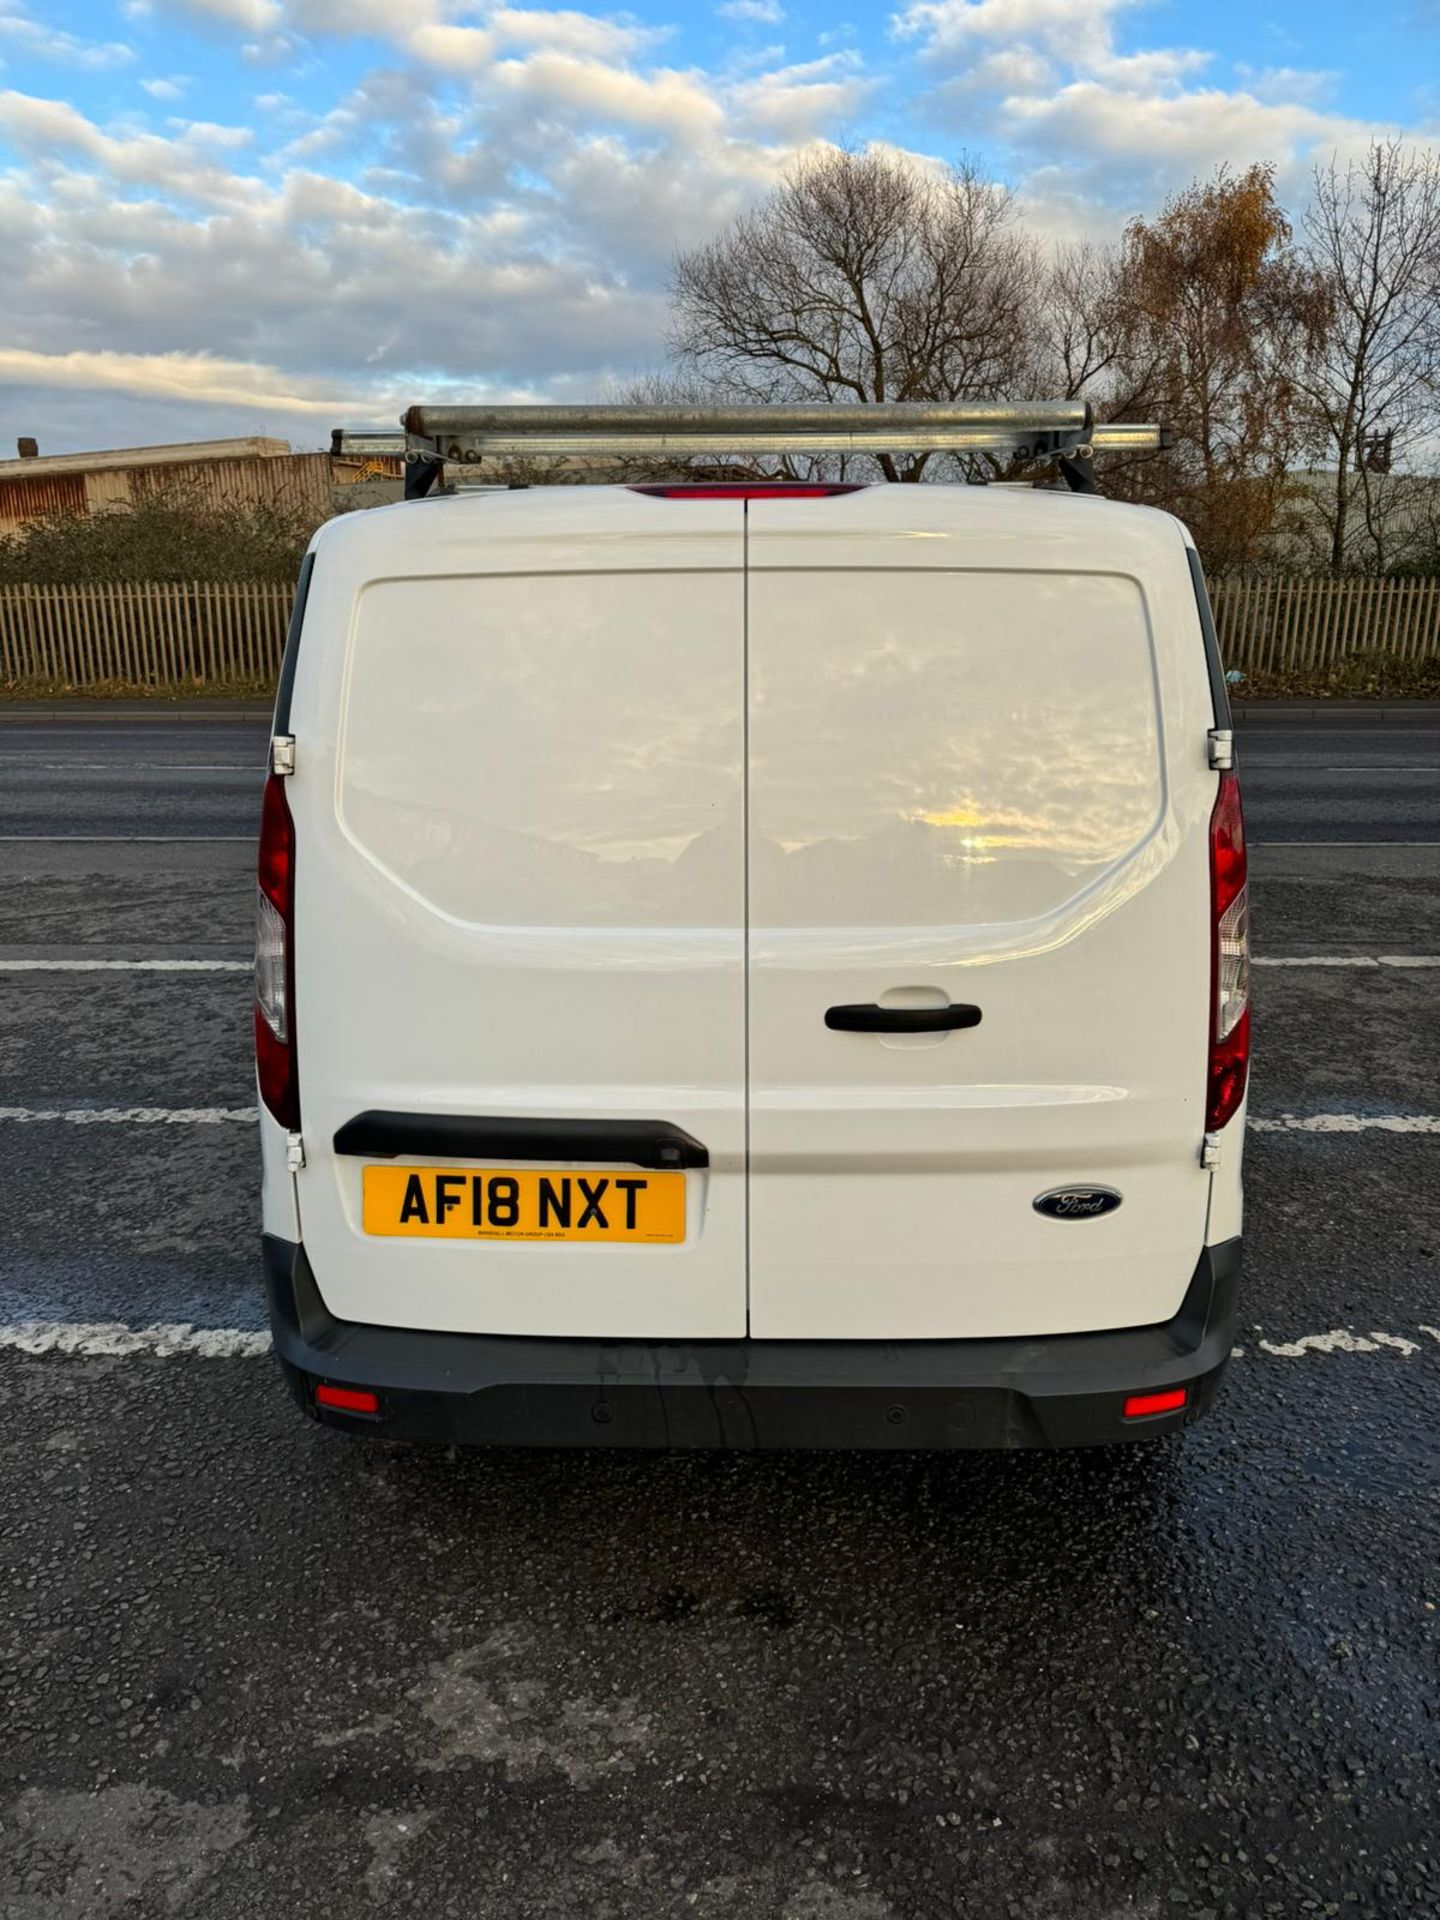 2018 18 FORD TRANSIT CONNECT TREND PAENL VAN - 128K MILES - EURO 6 - 3 SEATS - LWB - ROOF RACK - Image 6 of 11